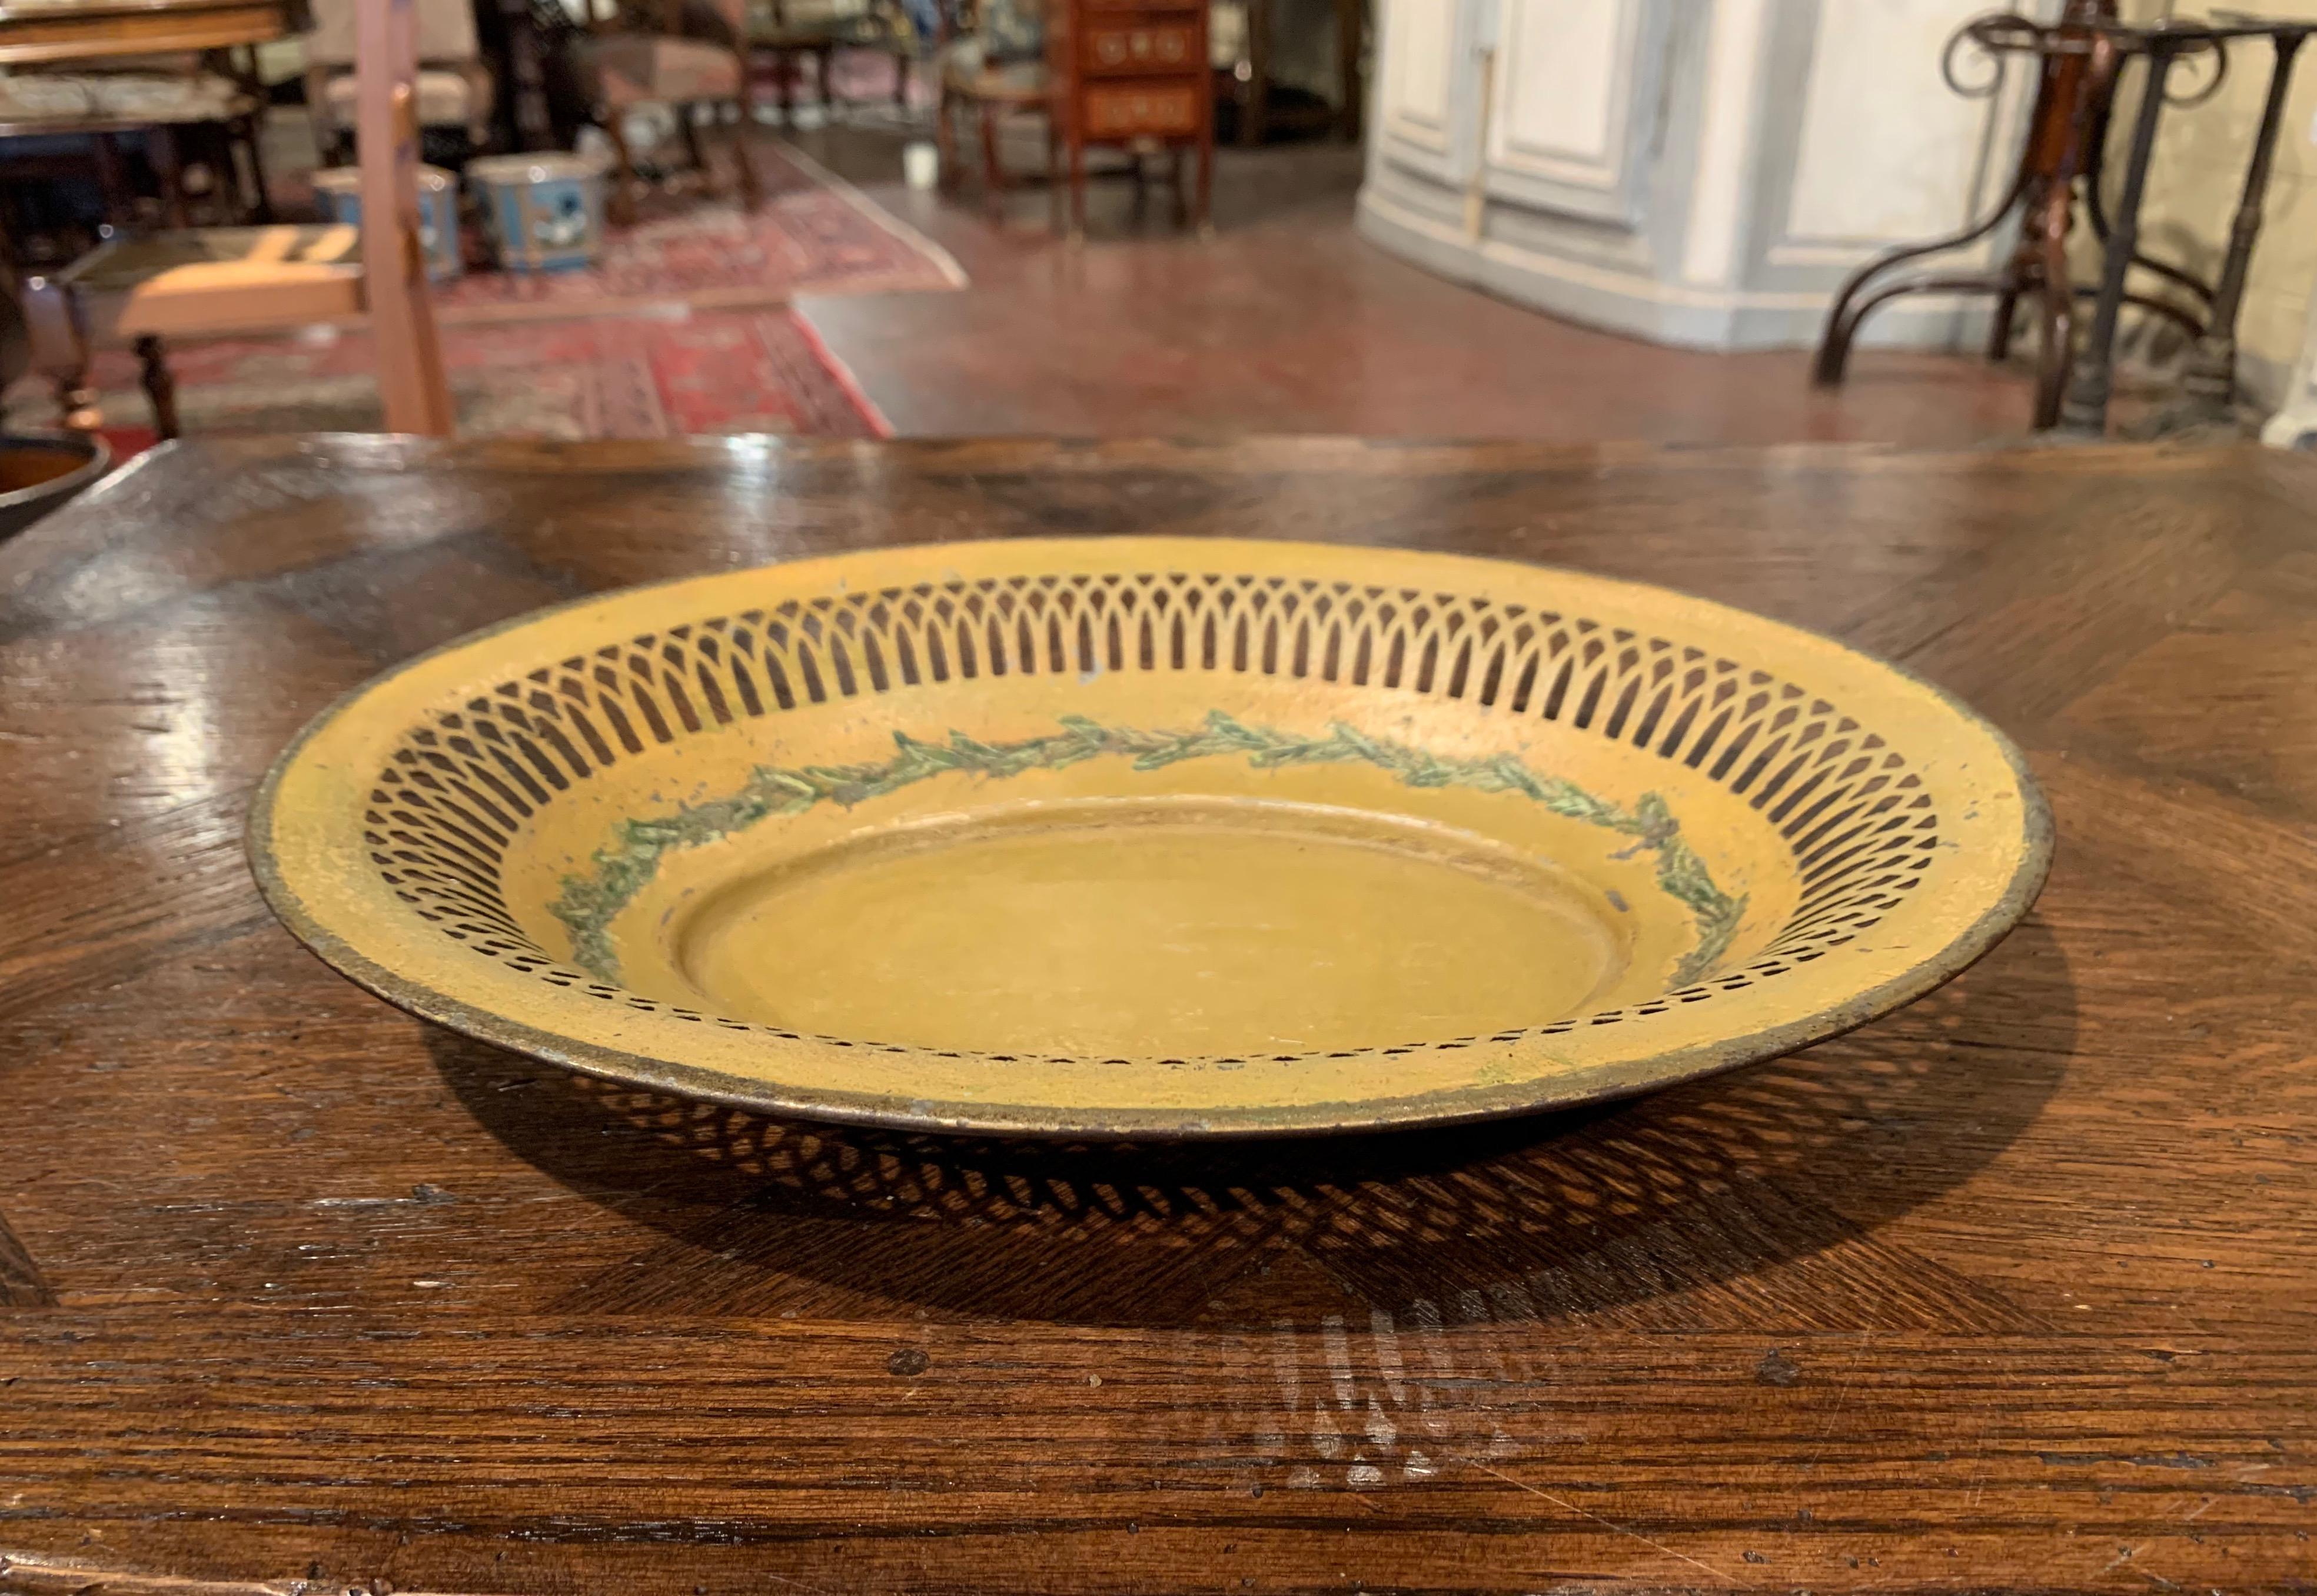 Display bread, crackers or fruit in this elegant antique basket; crafted in France circa 1880, the oval tole basket features a decorative pierced rim around the perimeter. The mustard painted bowl is hand painted with green floral motifs on the